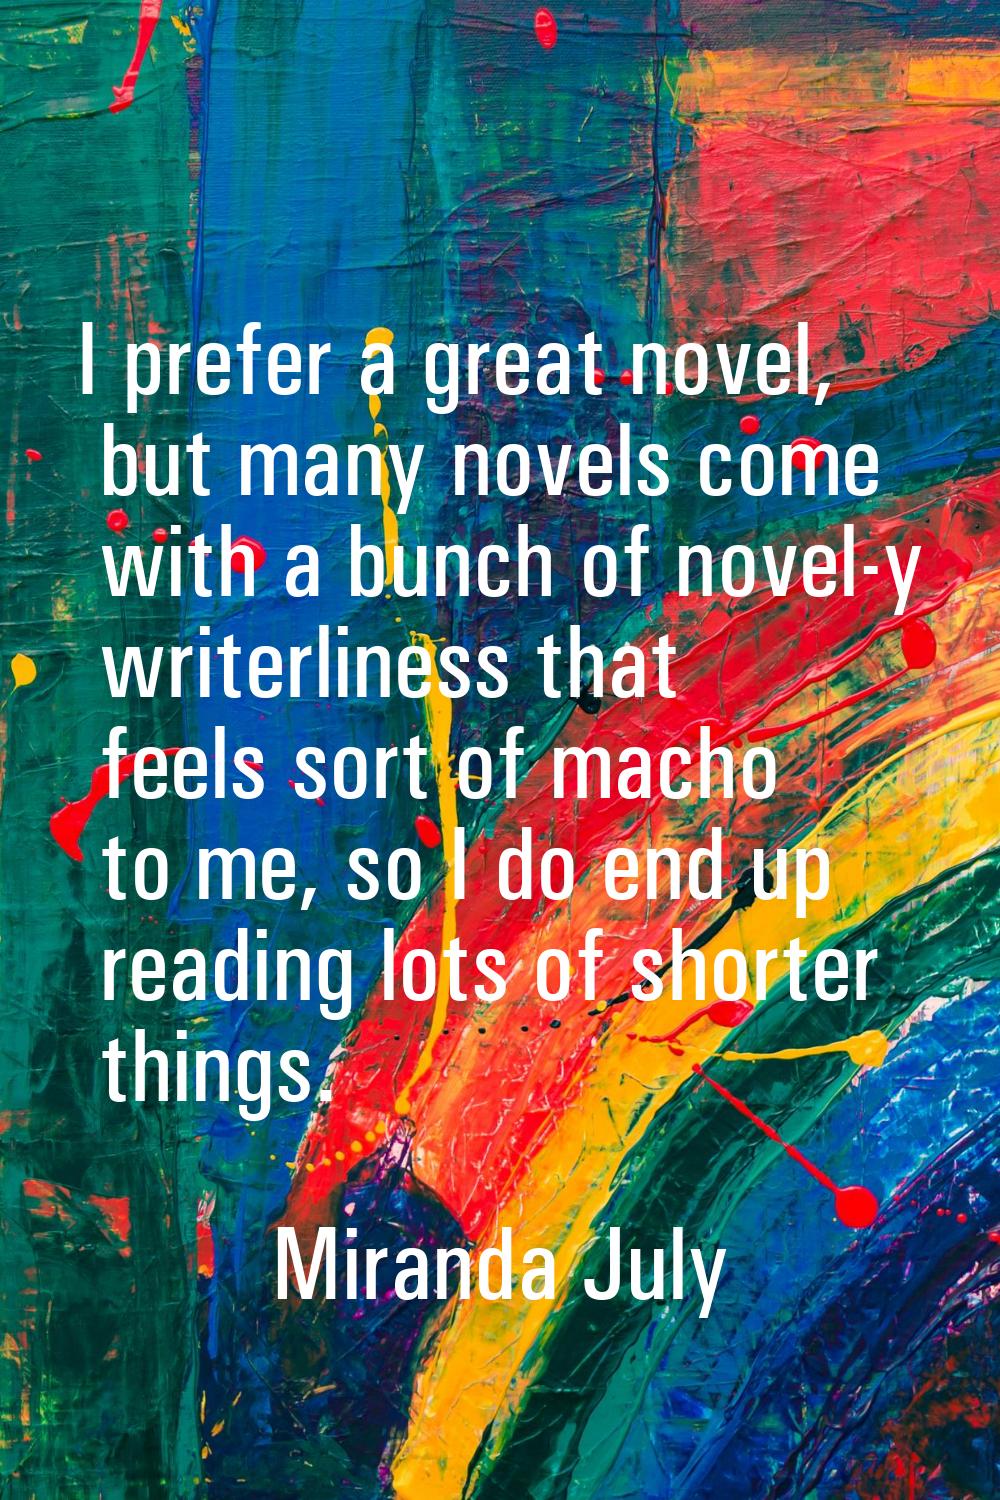 I prefer a great novel, but many novels come with a bunch of novel-y writerliness that feels sort o